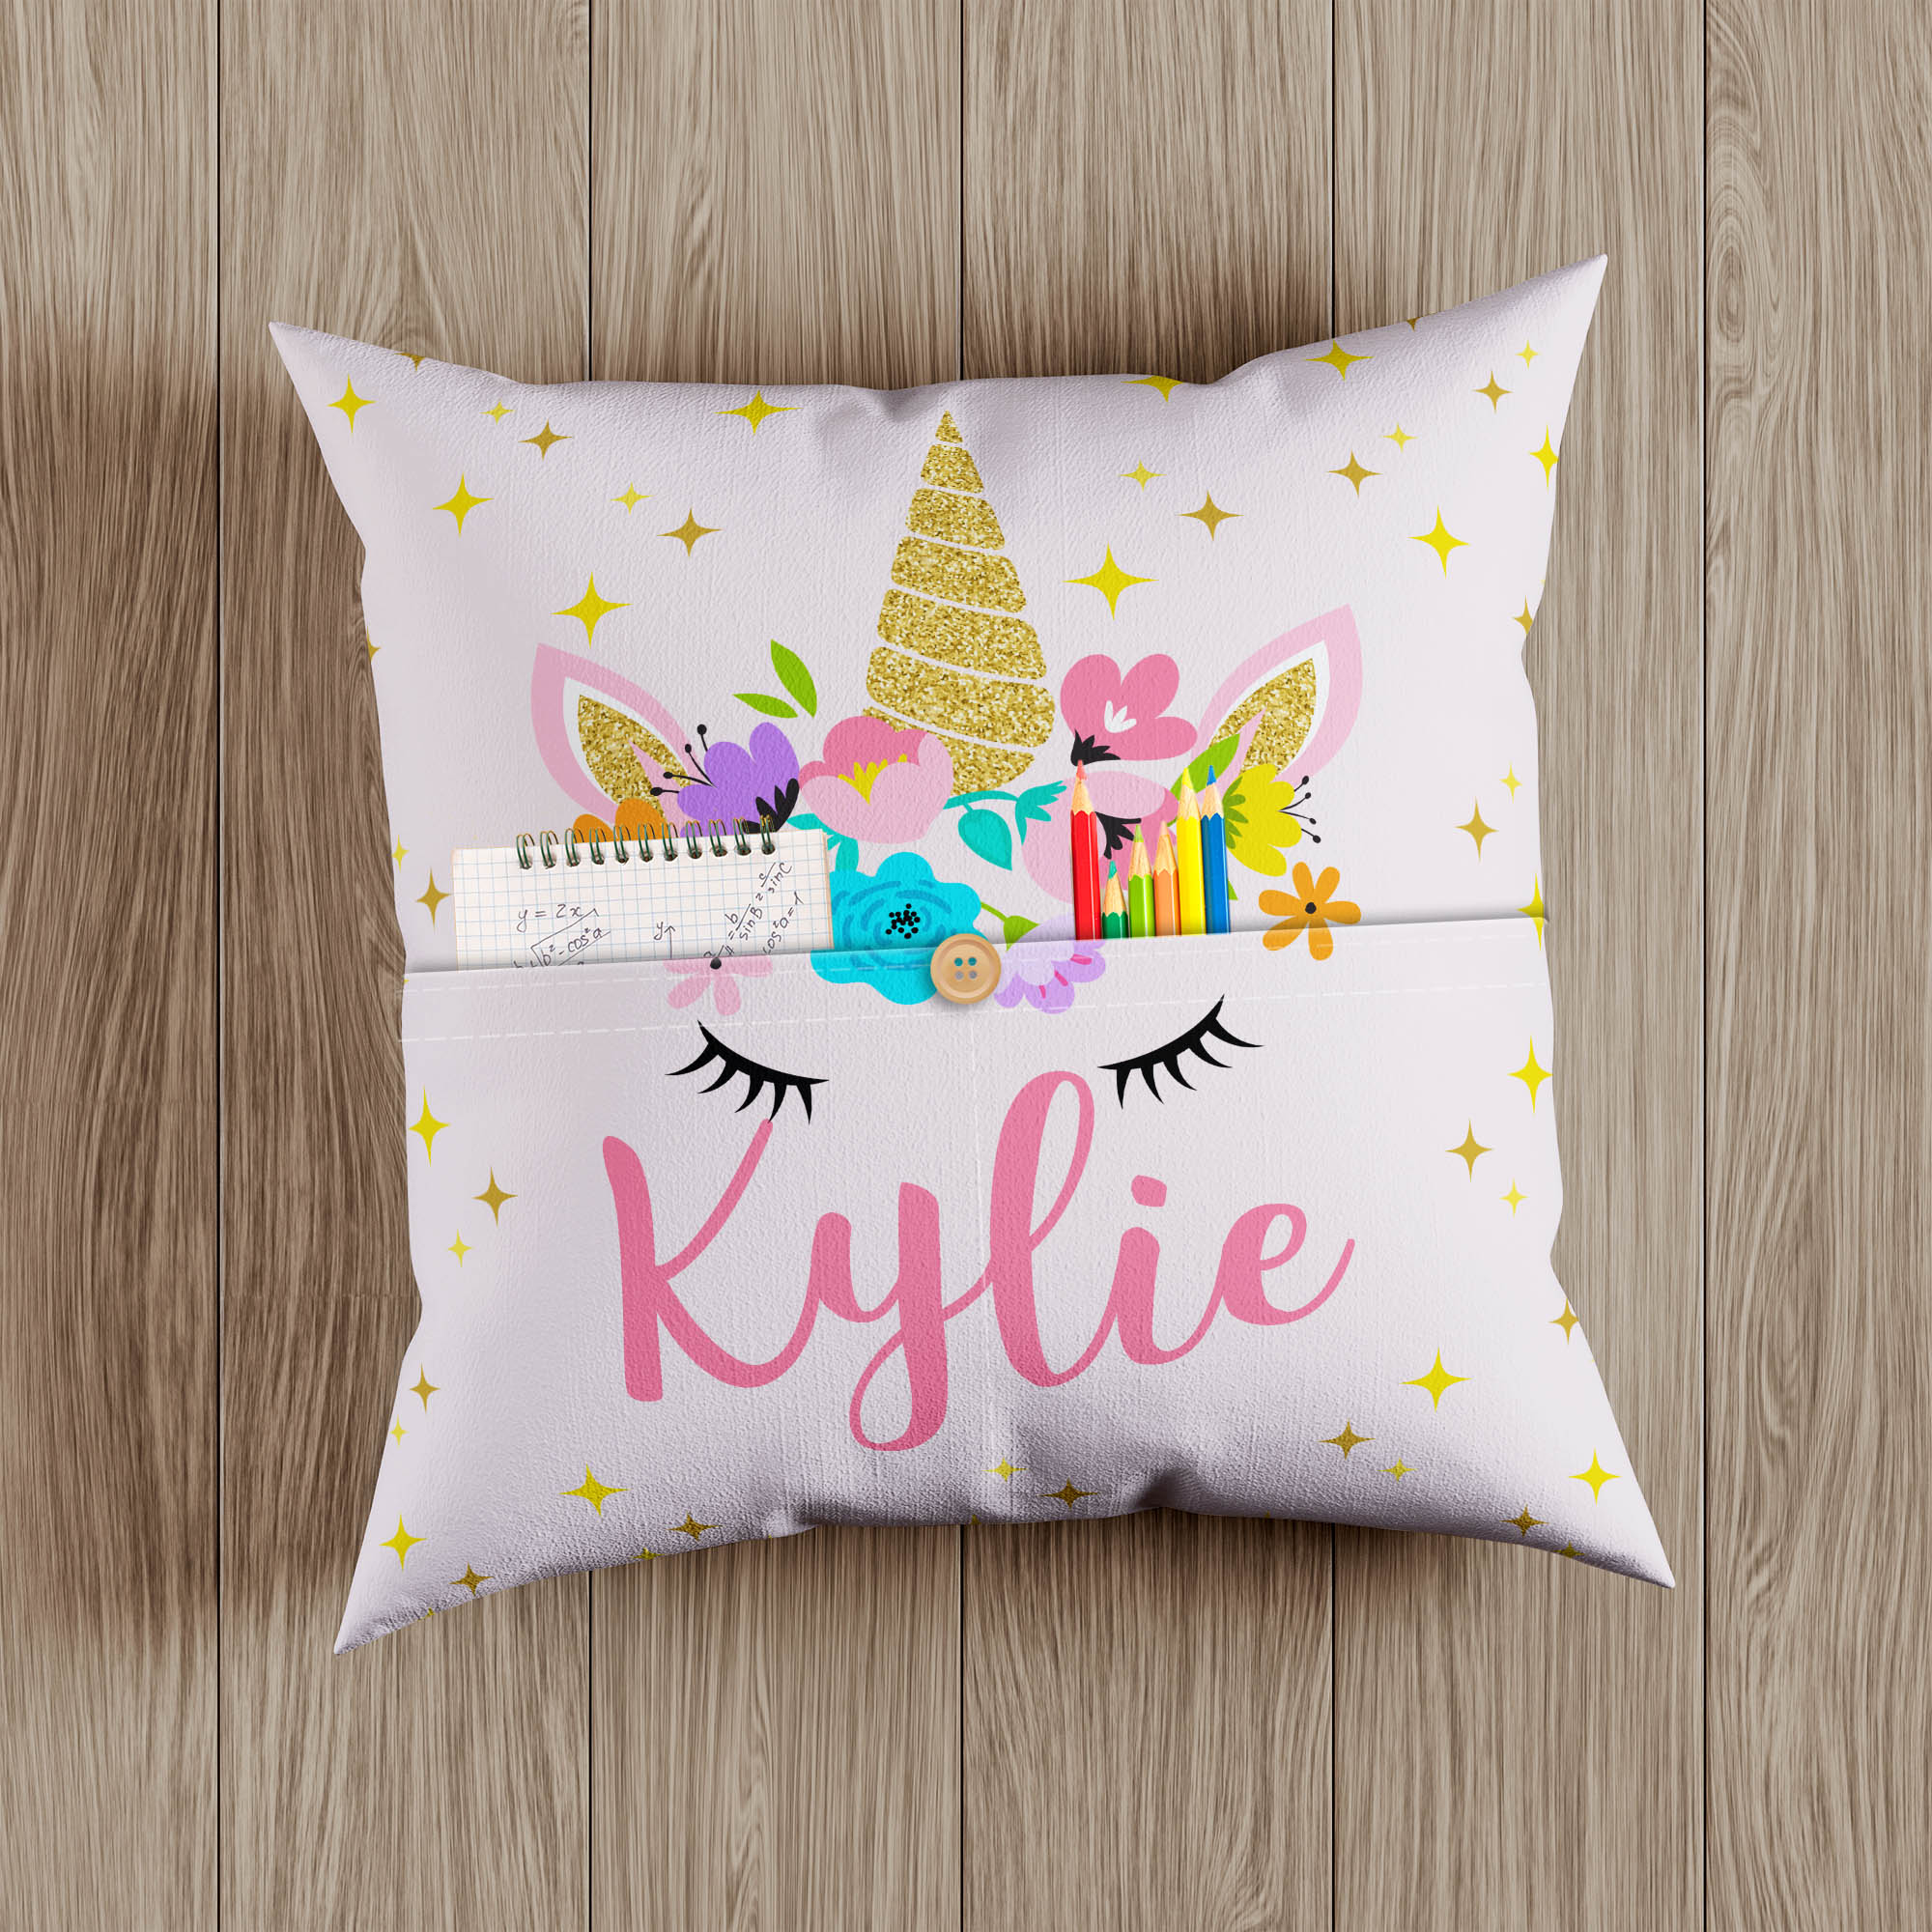 Sunflower Letter B Pillow Case, Floral Personalized Initial Cushion Cover,  Custom Monogram Pillow Case, Custom Pillow Cover,Throw Pillow, Pillow Cover